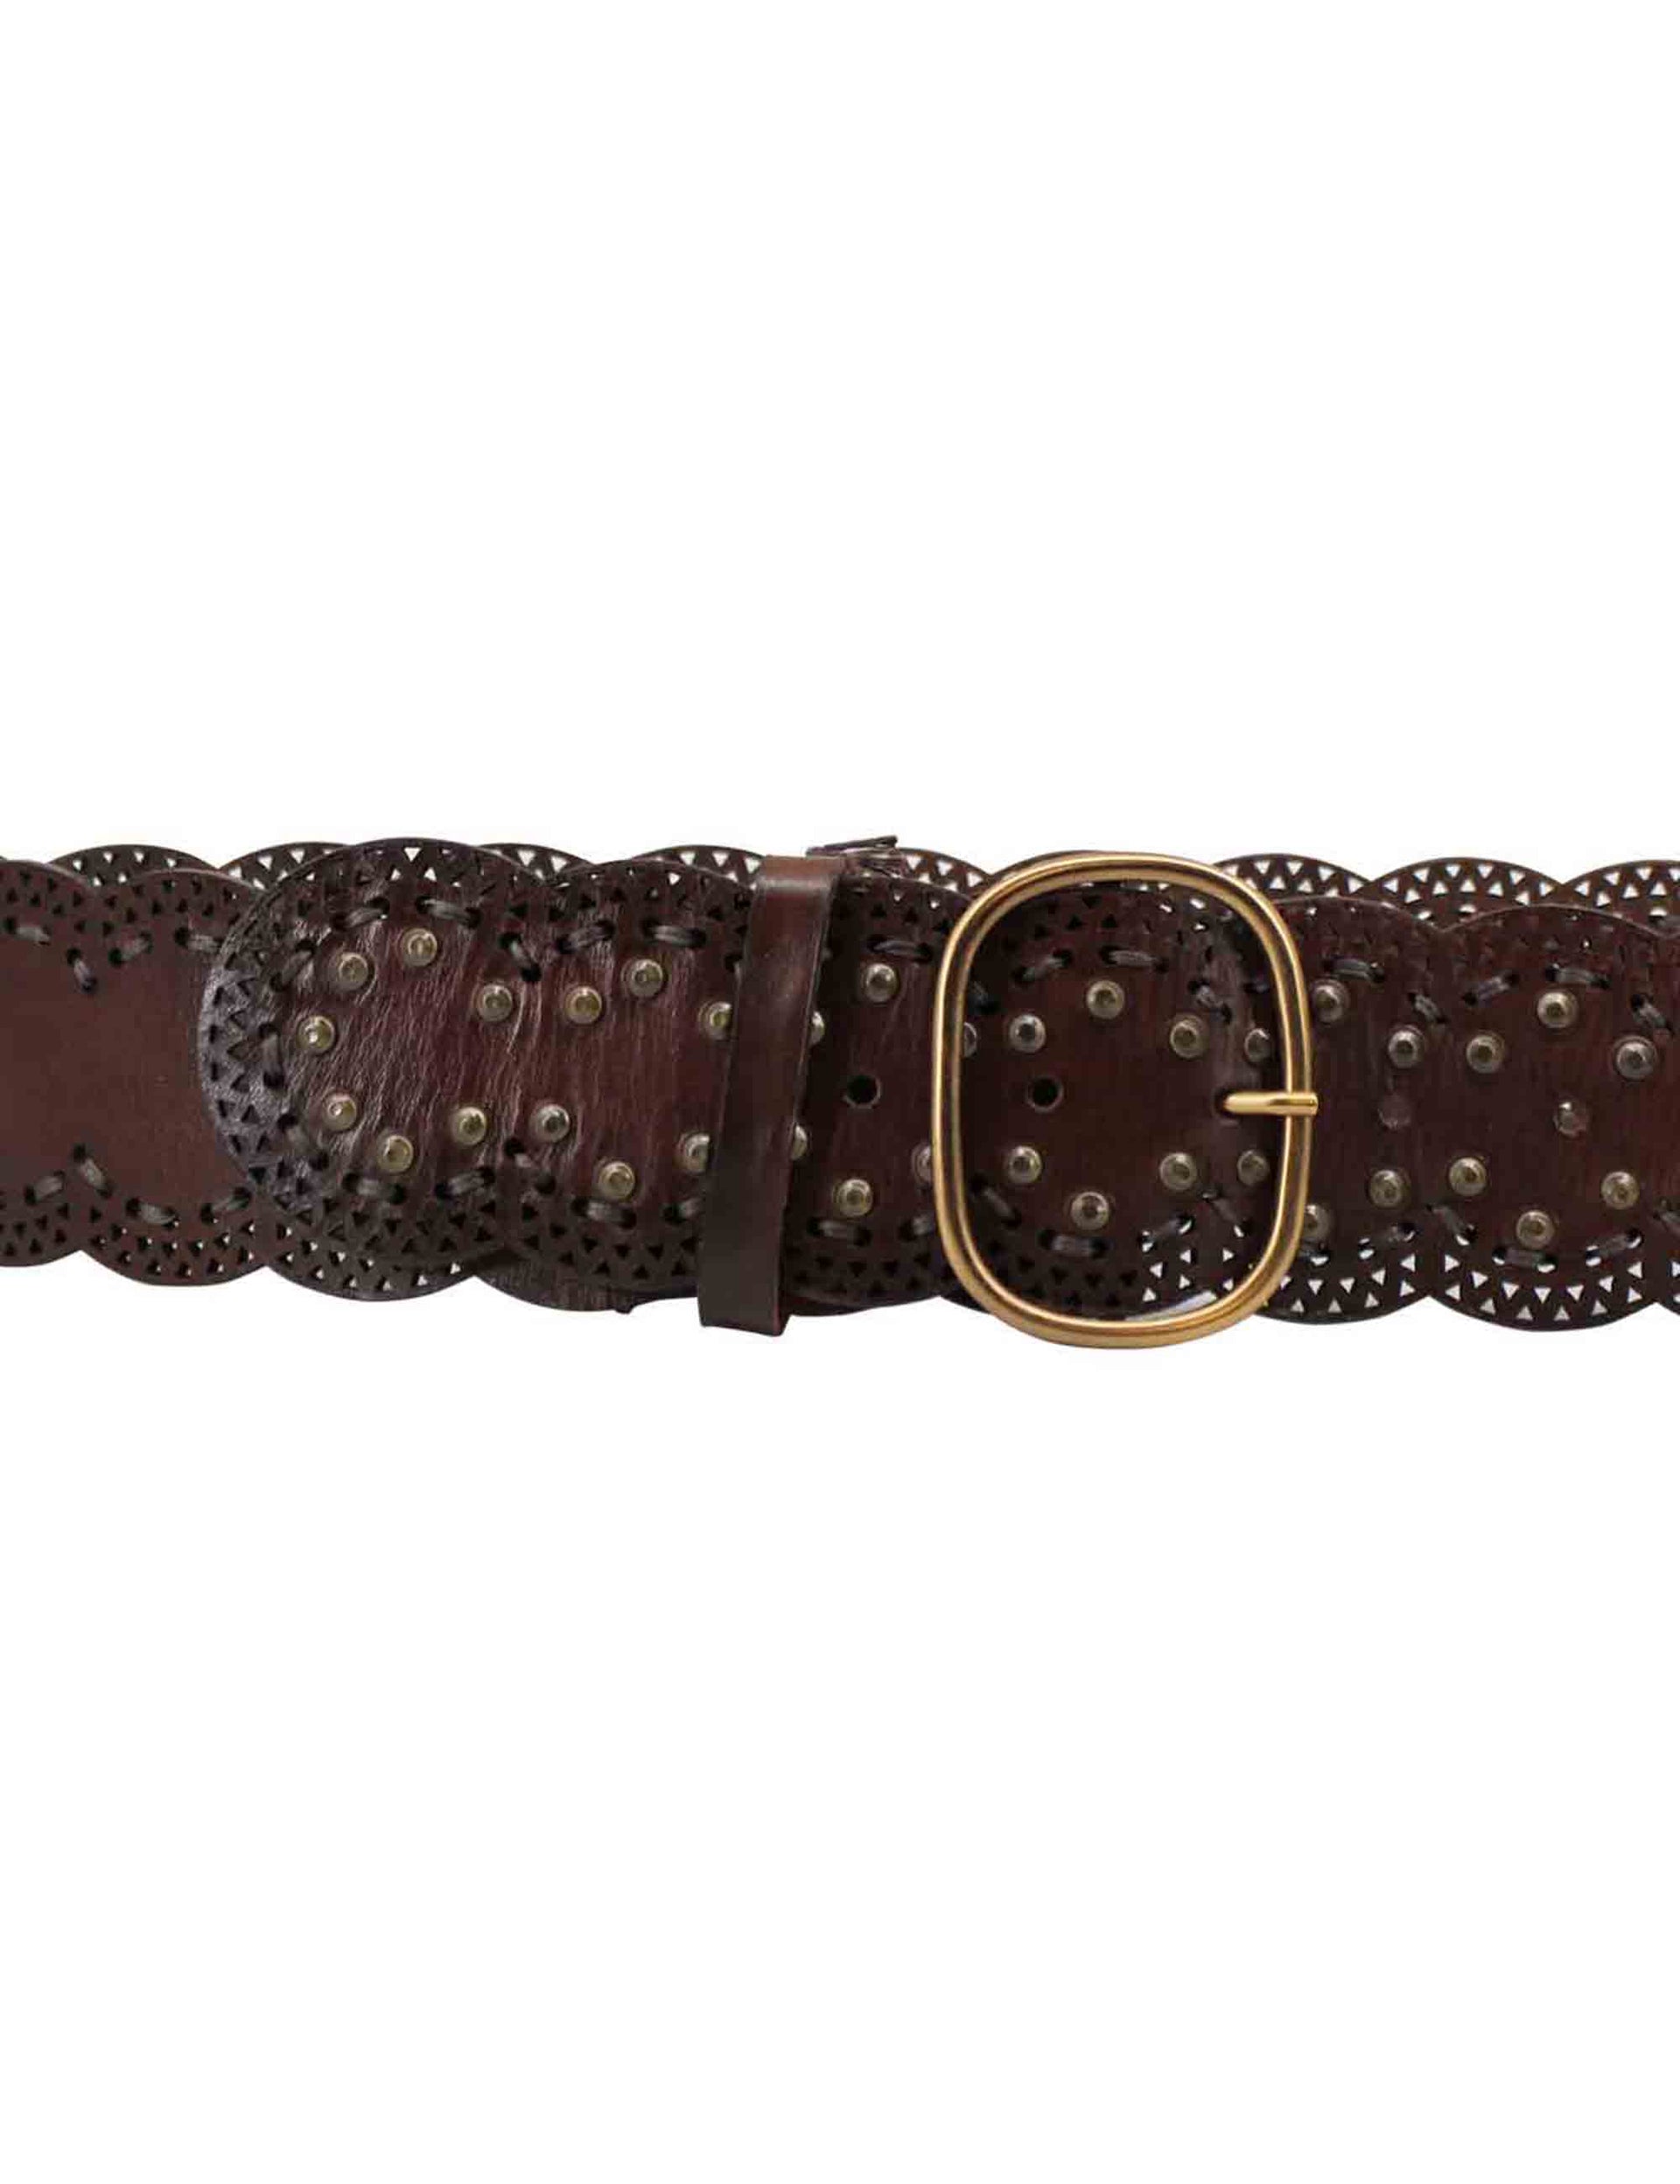 Women's belts in dark brown leather with buckle and studs